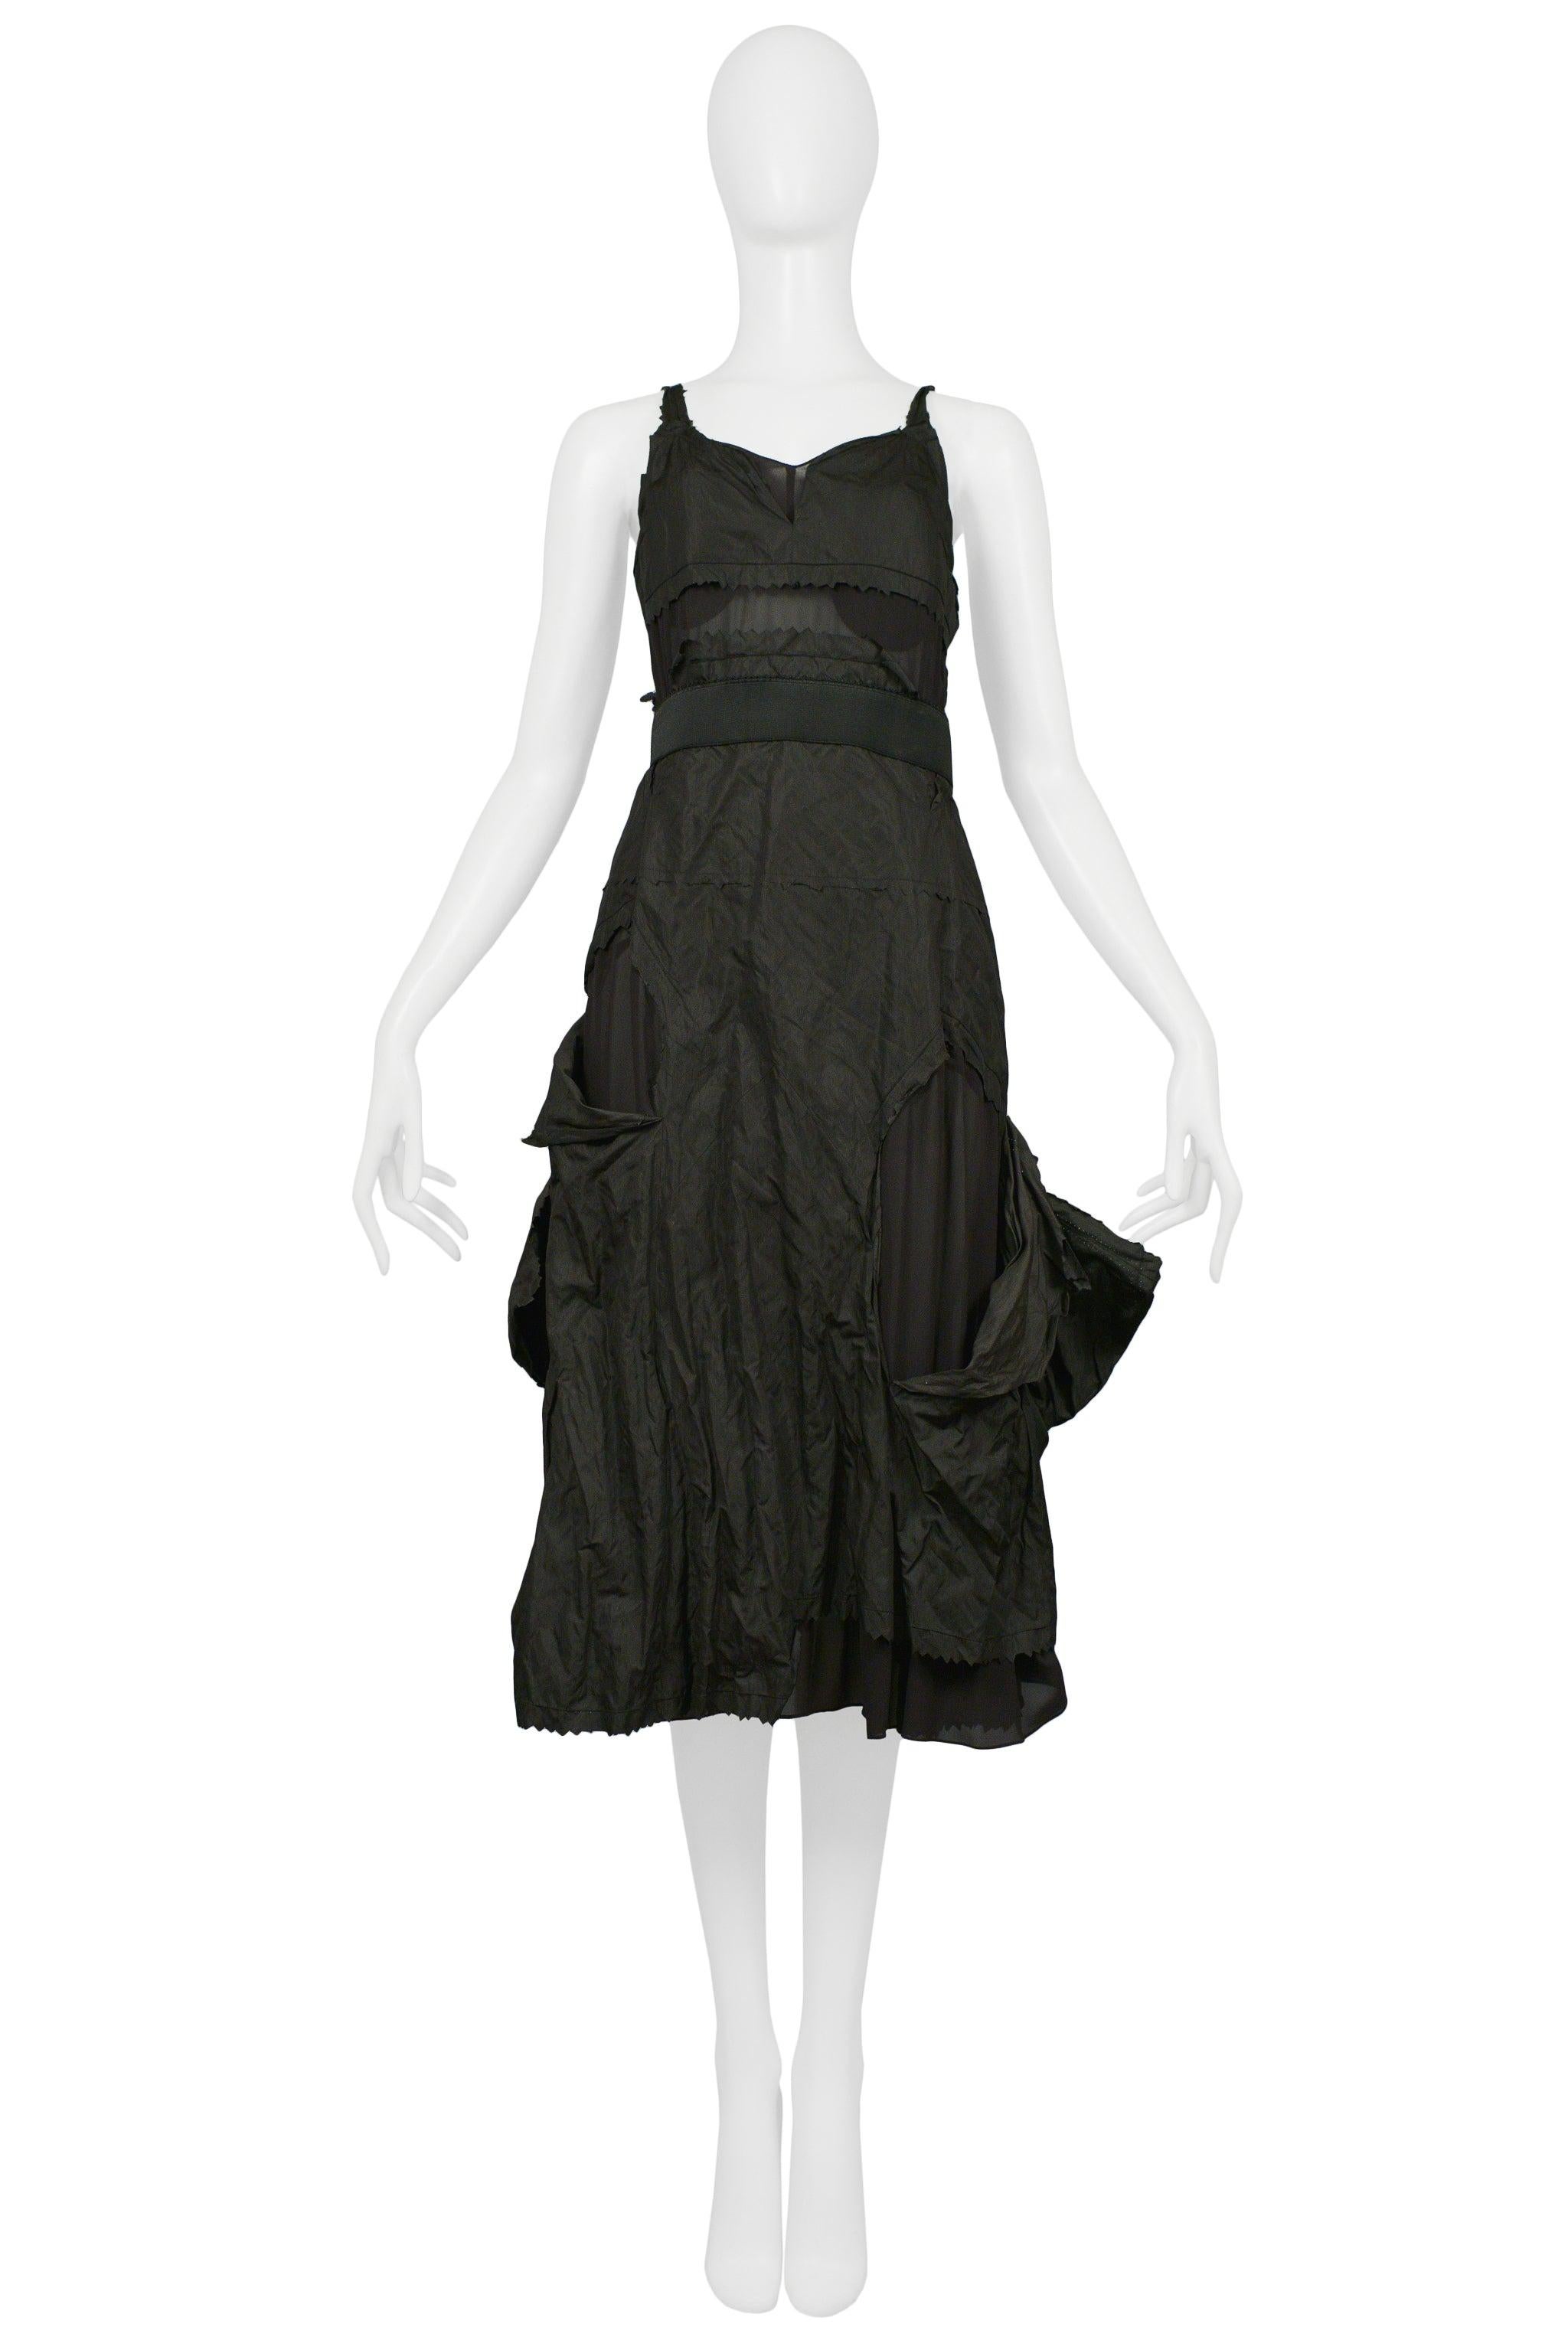 Resurrection is excited to offer this vintage Christian Dior by John Galliano black taffeta hobo style slip dress featuring cutouts, tattered panels, skinny straps, bra bodies, sheer panels, low back, and raw edges.

Christian Dior